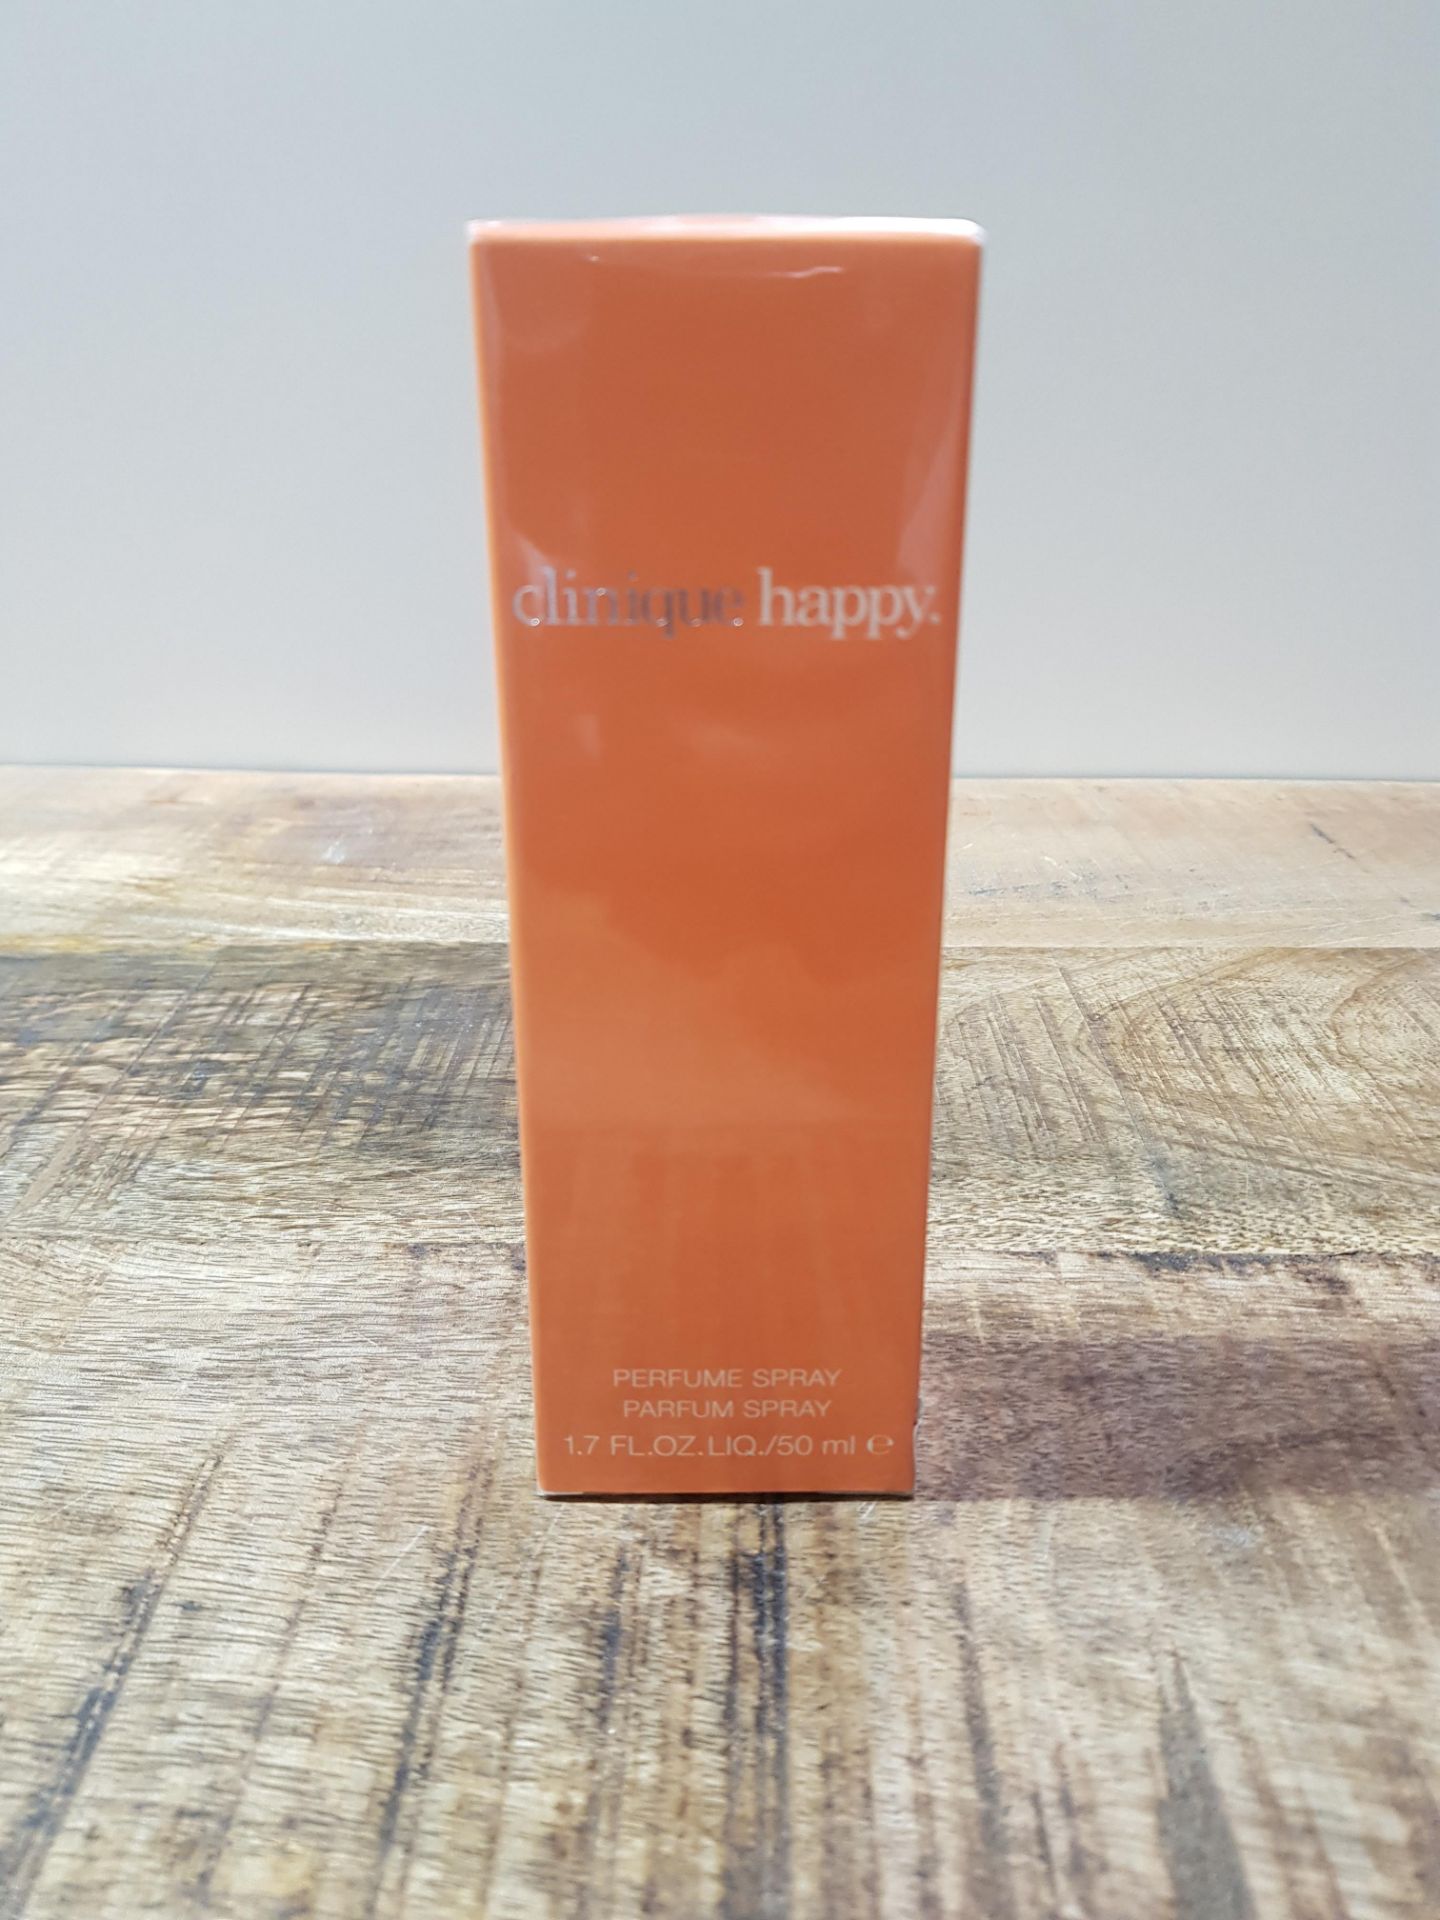 BRAND NEW CLINIQUE HAPPY PERFUME SPRAY 50ML RRP £32Condition ReportAppraisal Available on Request-